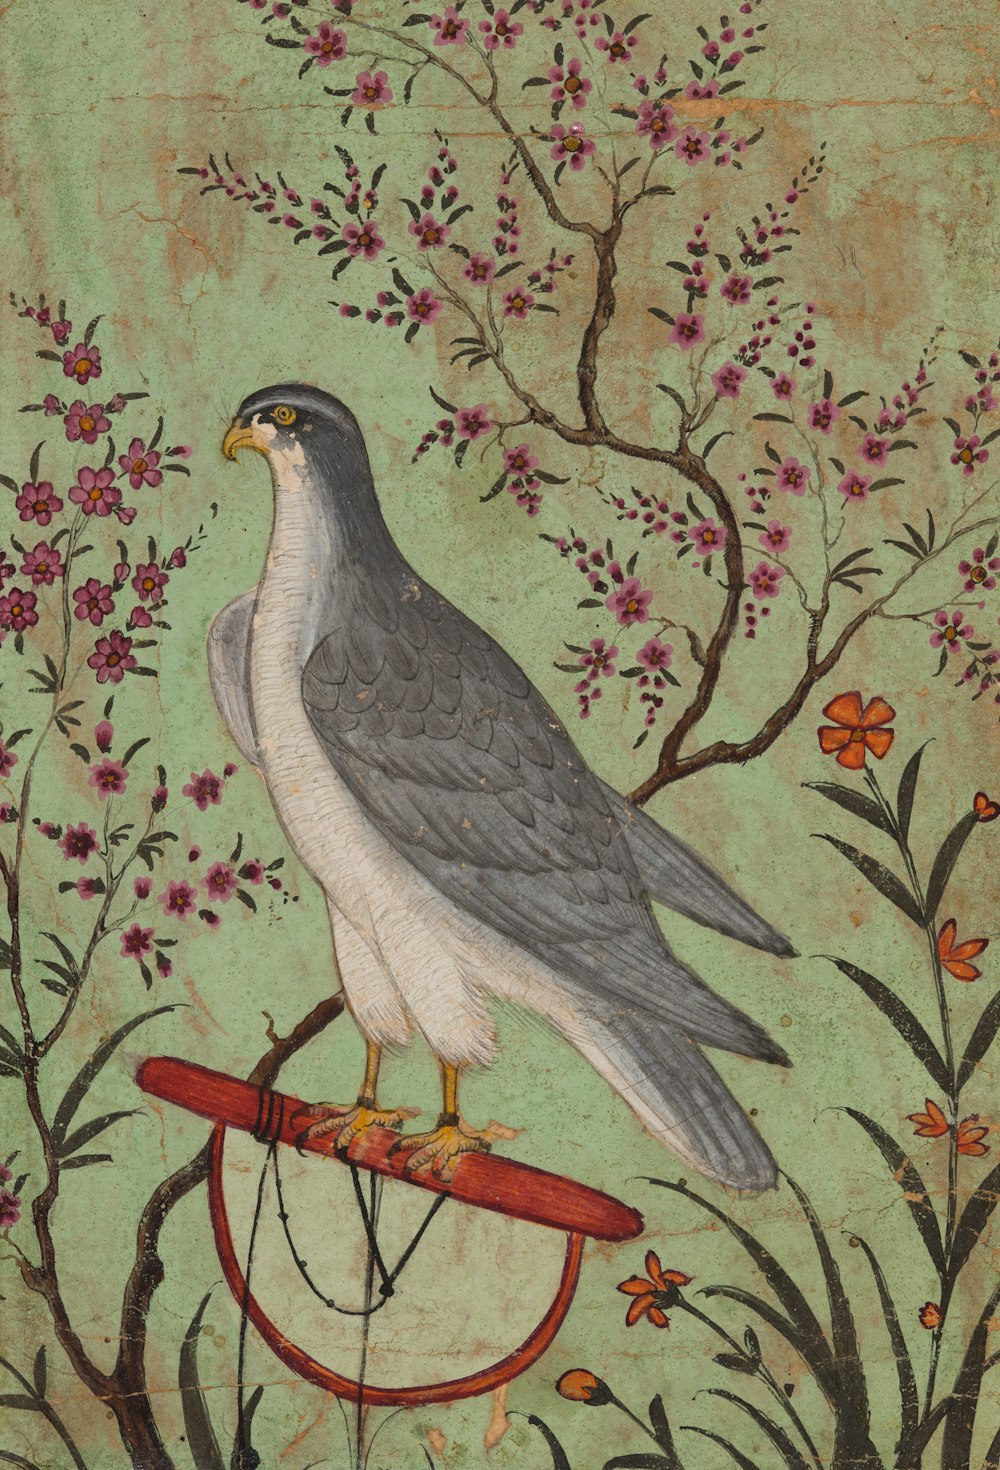 a painting of a bird sitting on a bicycle